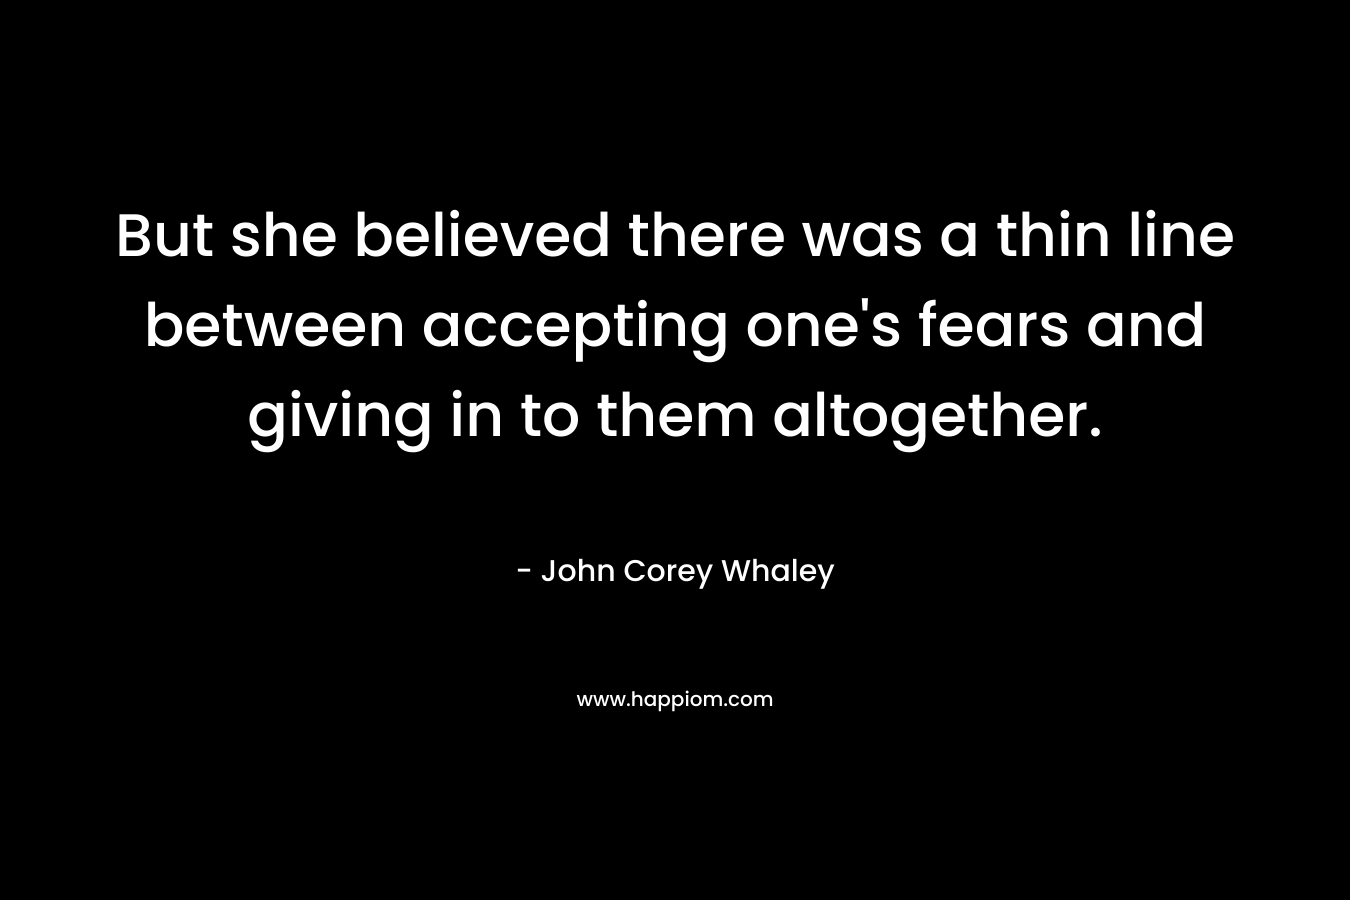 But she believed there was a thin line between accepting one's fears and giving in to them altogether.